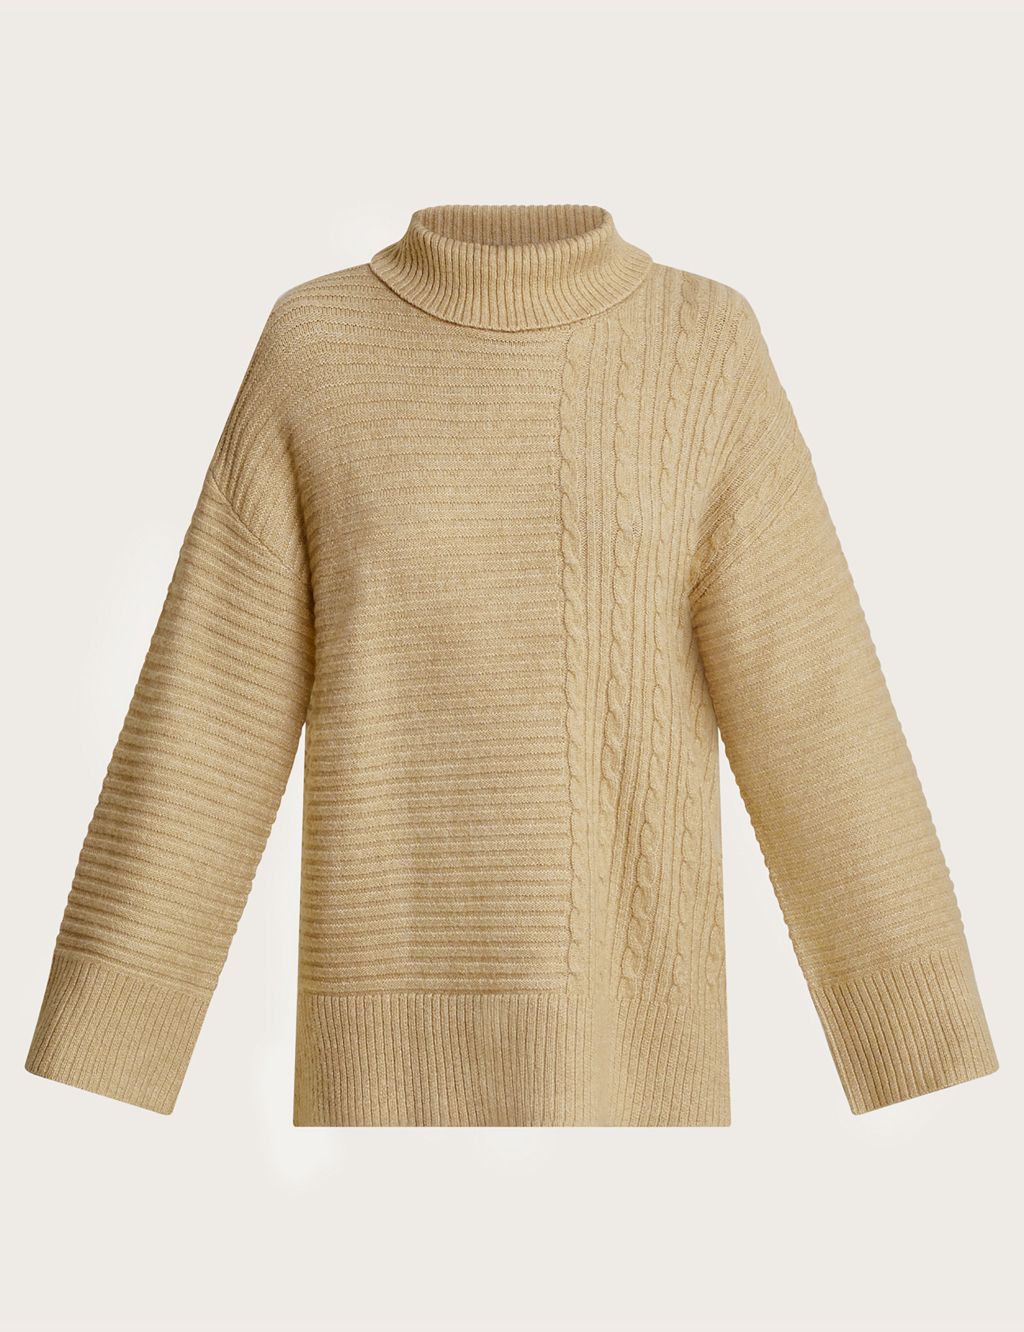 Ribbed Roll Neck Button Detail Jumper image 2